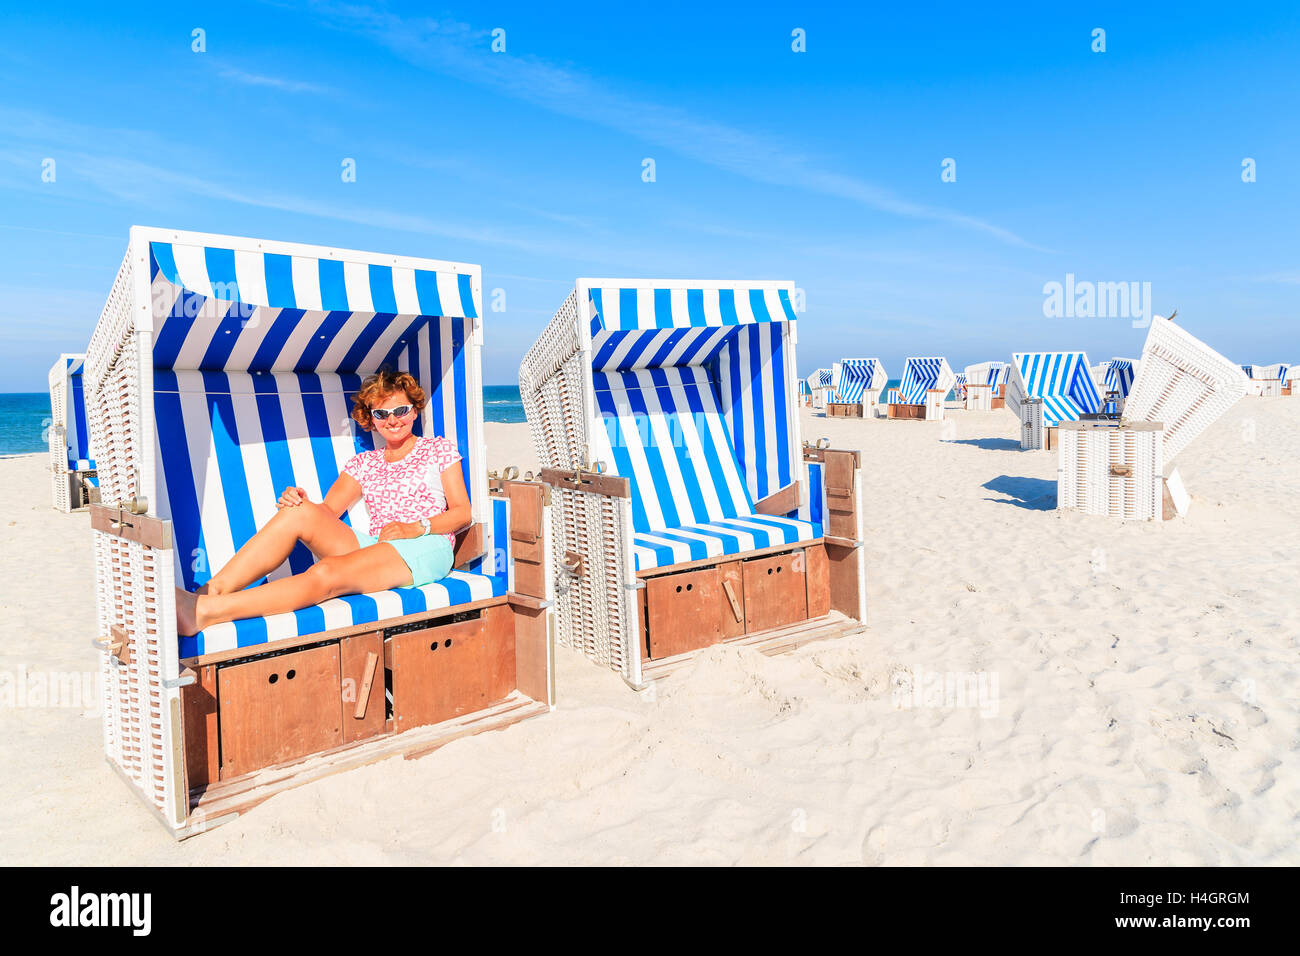 Happy woman sitting in beach chair and enjoying summer time, Kampen, Sylt island, Germany Stock Photo